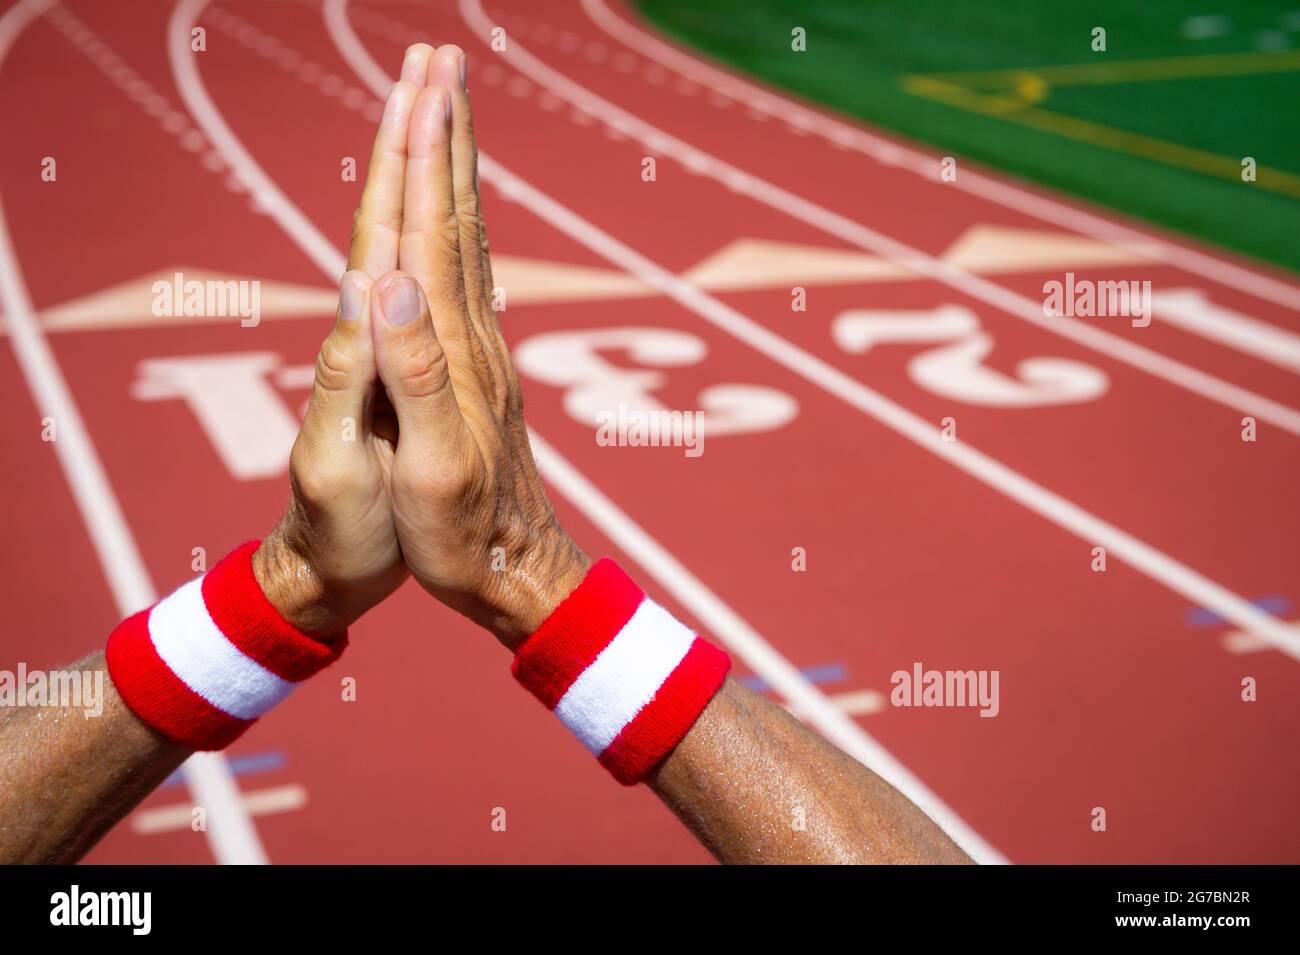 Hands of Japanese athlete wearing red and white colored wristbands making hopeful prayer gesture of gratitude against a red athletic track background Stock Photo